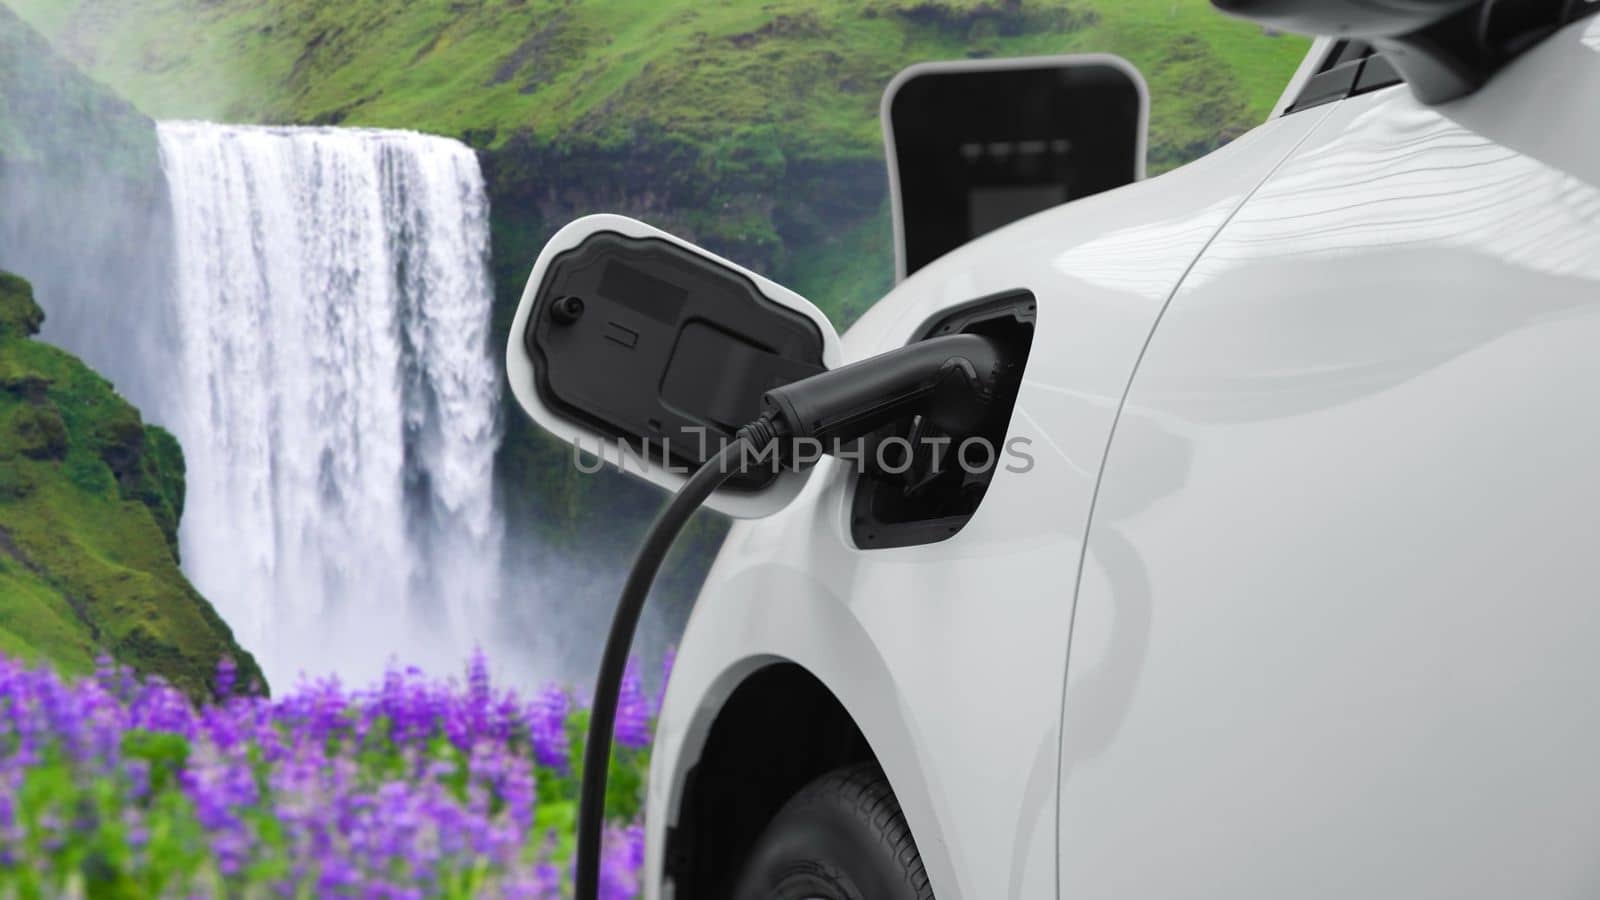 Electric car charging energy from charging station in the natural scenery, waterfall and stream background. Progressive concept of energy sustainability by EV car powered by renewable energy.